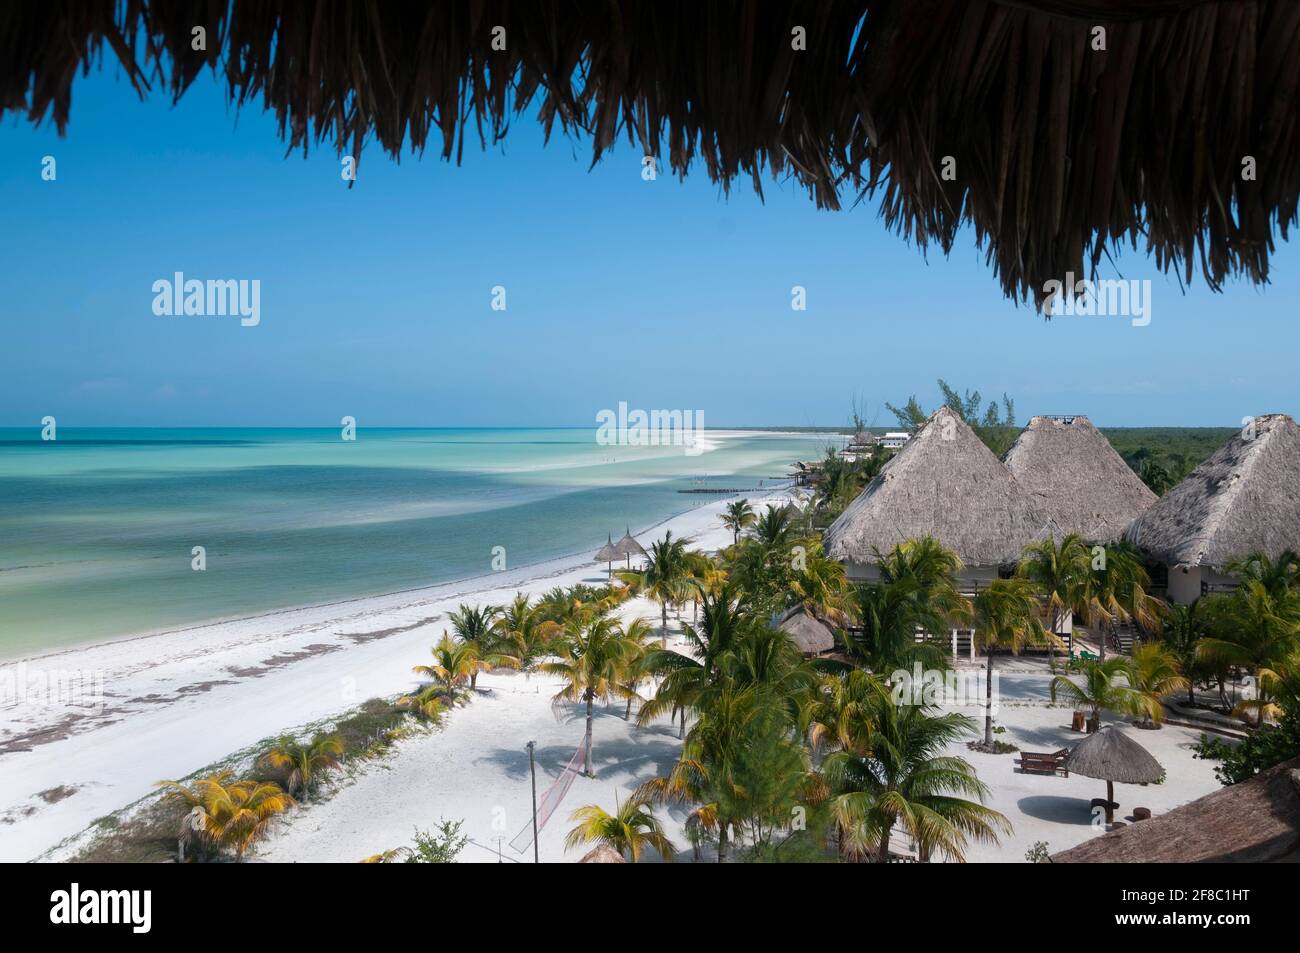 Panoramic view of a beach on Holbox Island in Mexico, with white sand, palm trees, and thatched huts. The perfect destination Stock Photo